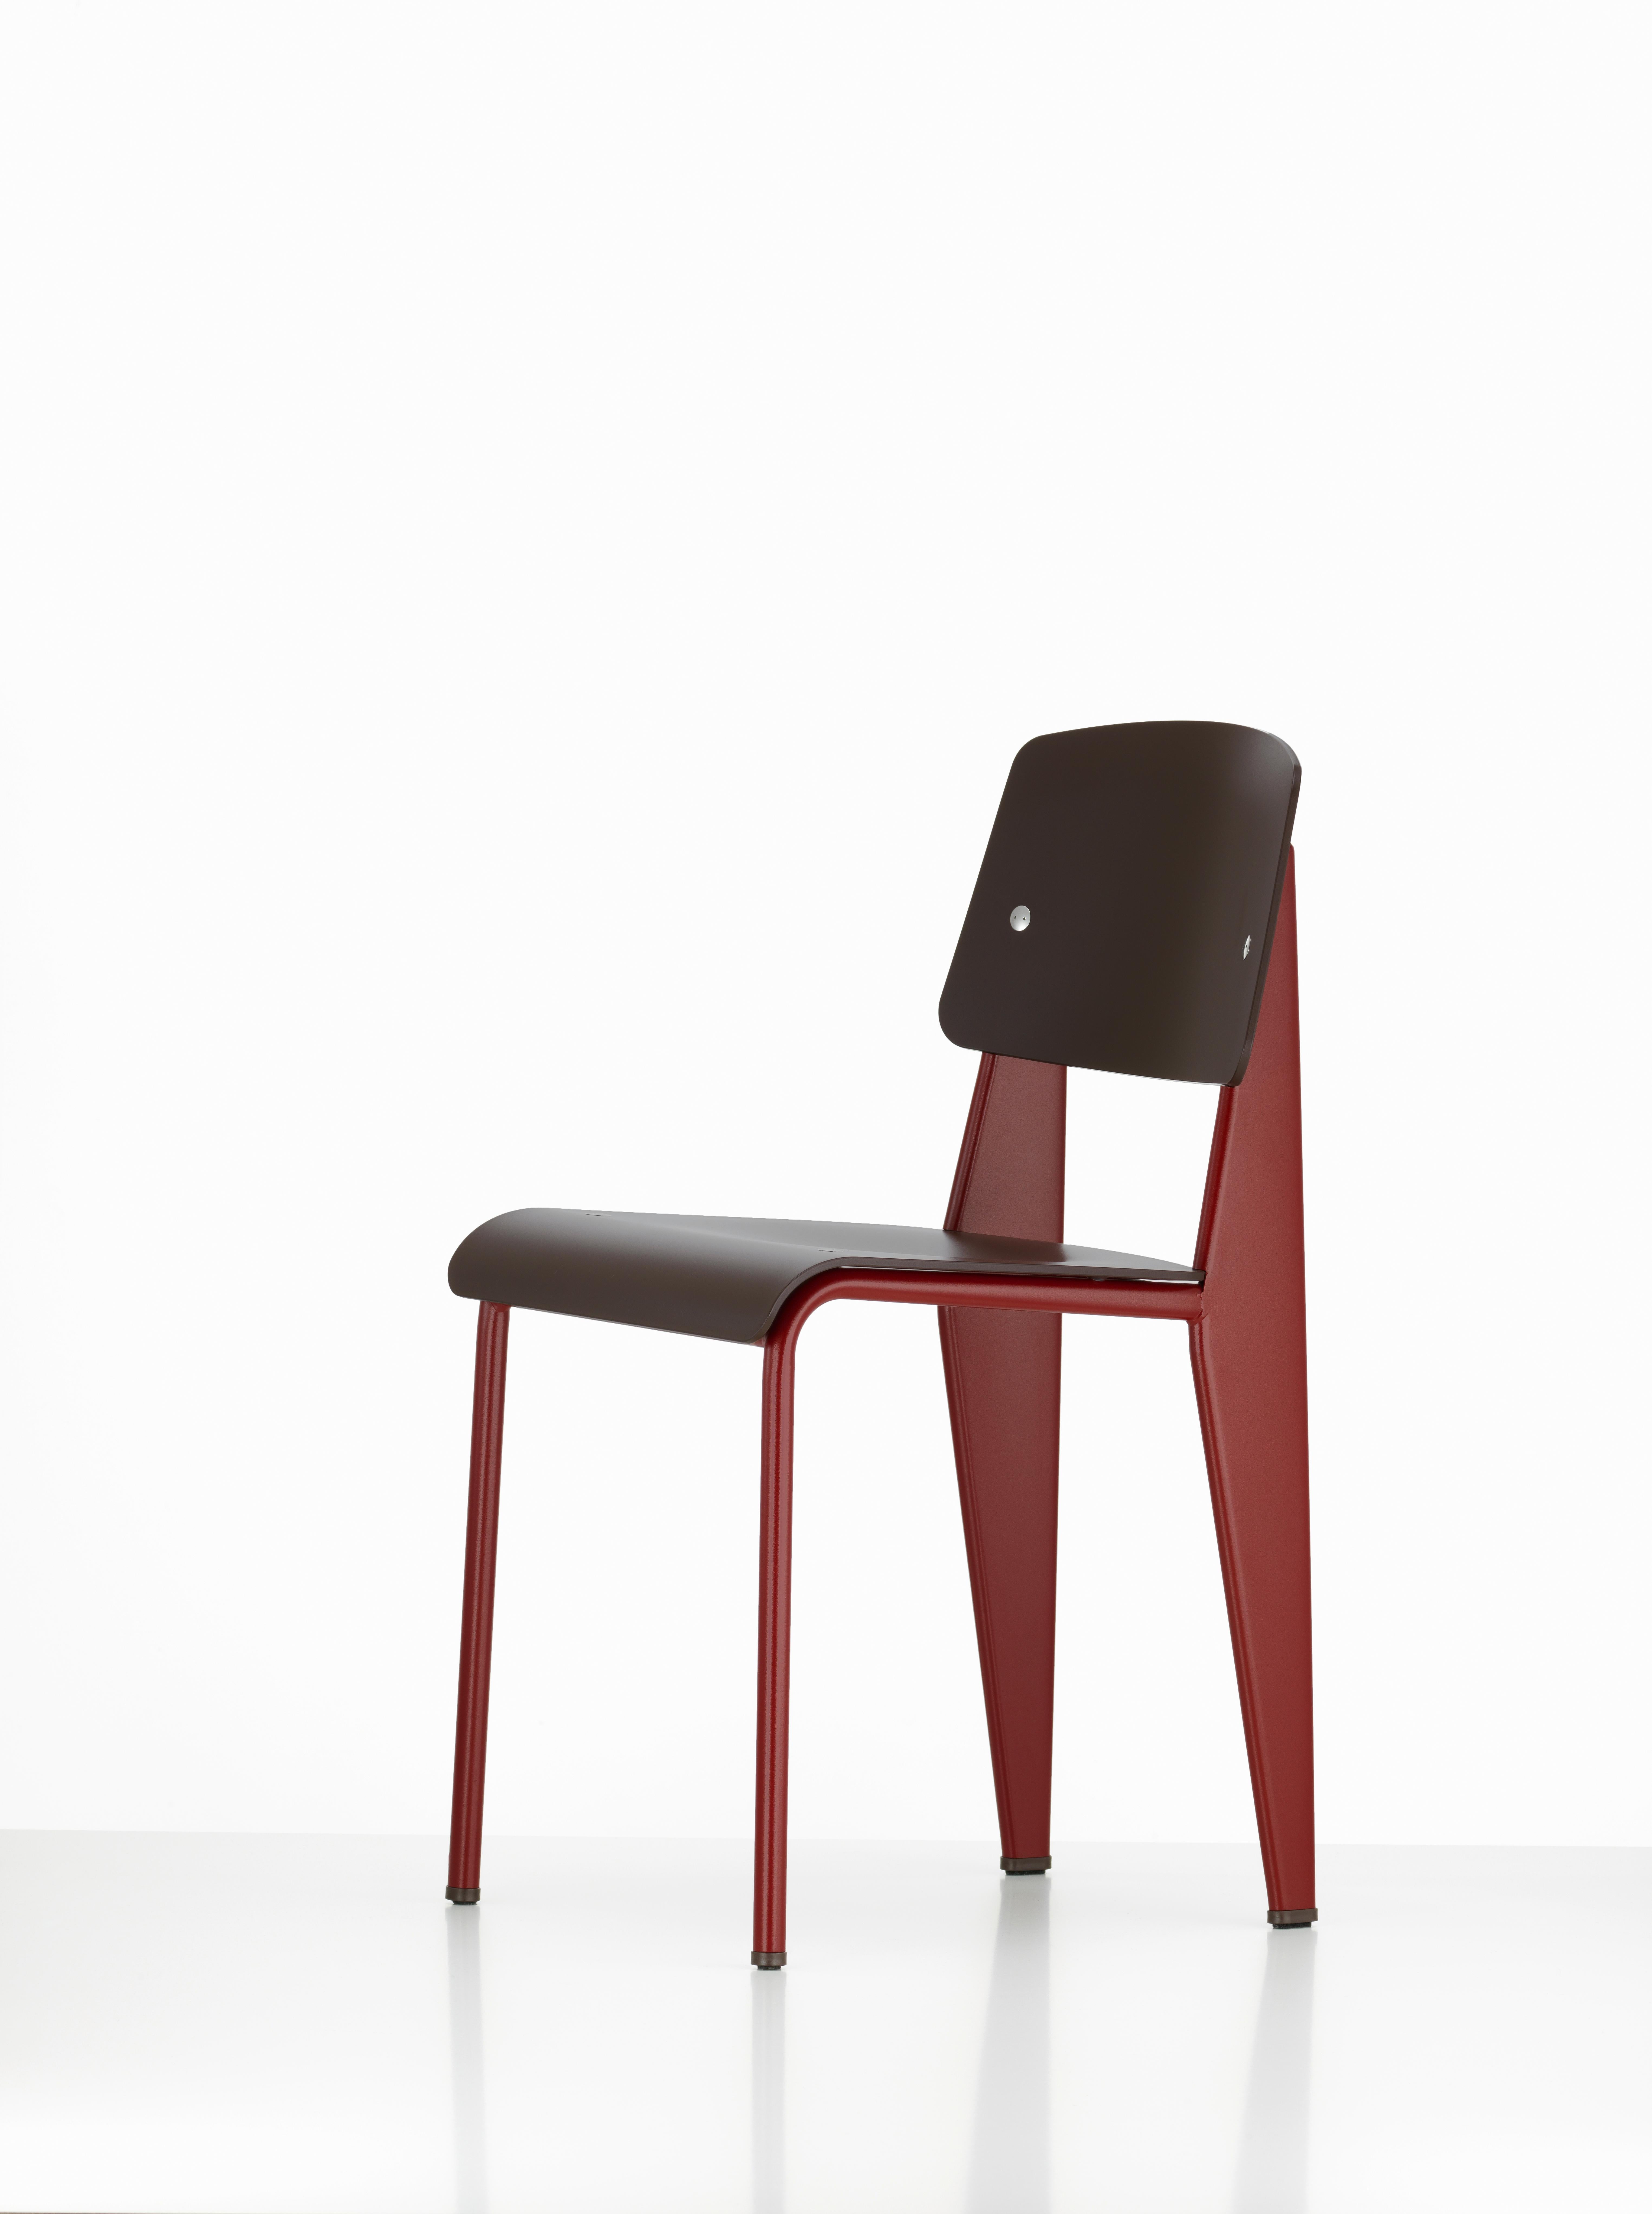 Jean Prouvé Standard Chair SP in Black for Vitra 1